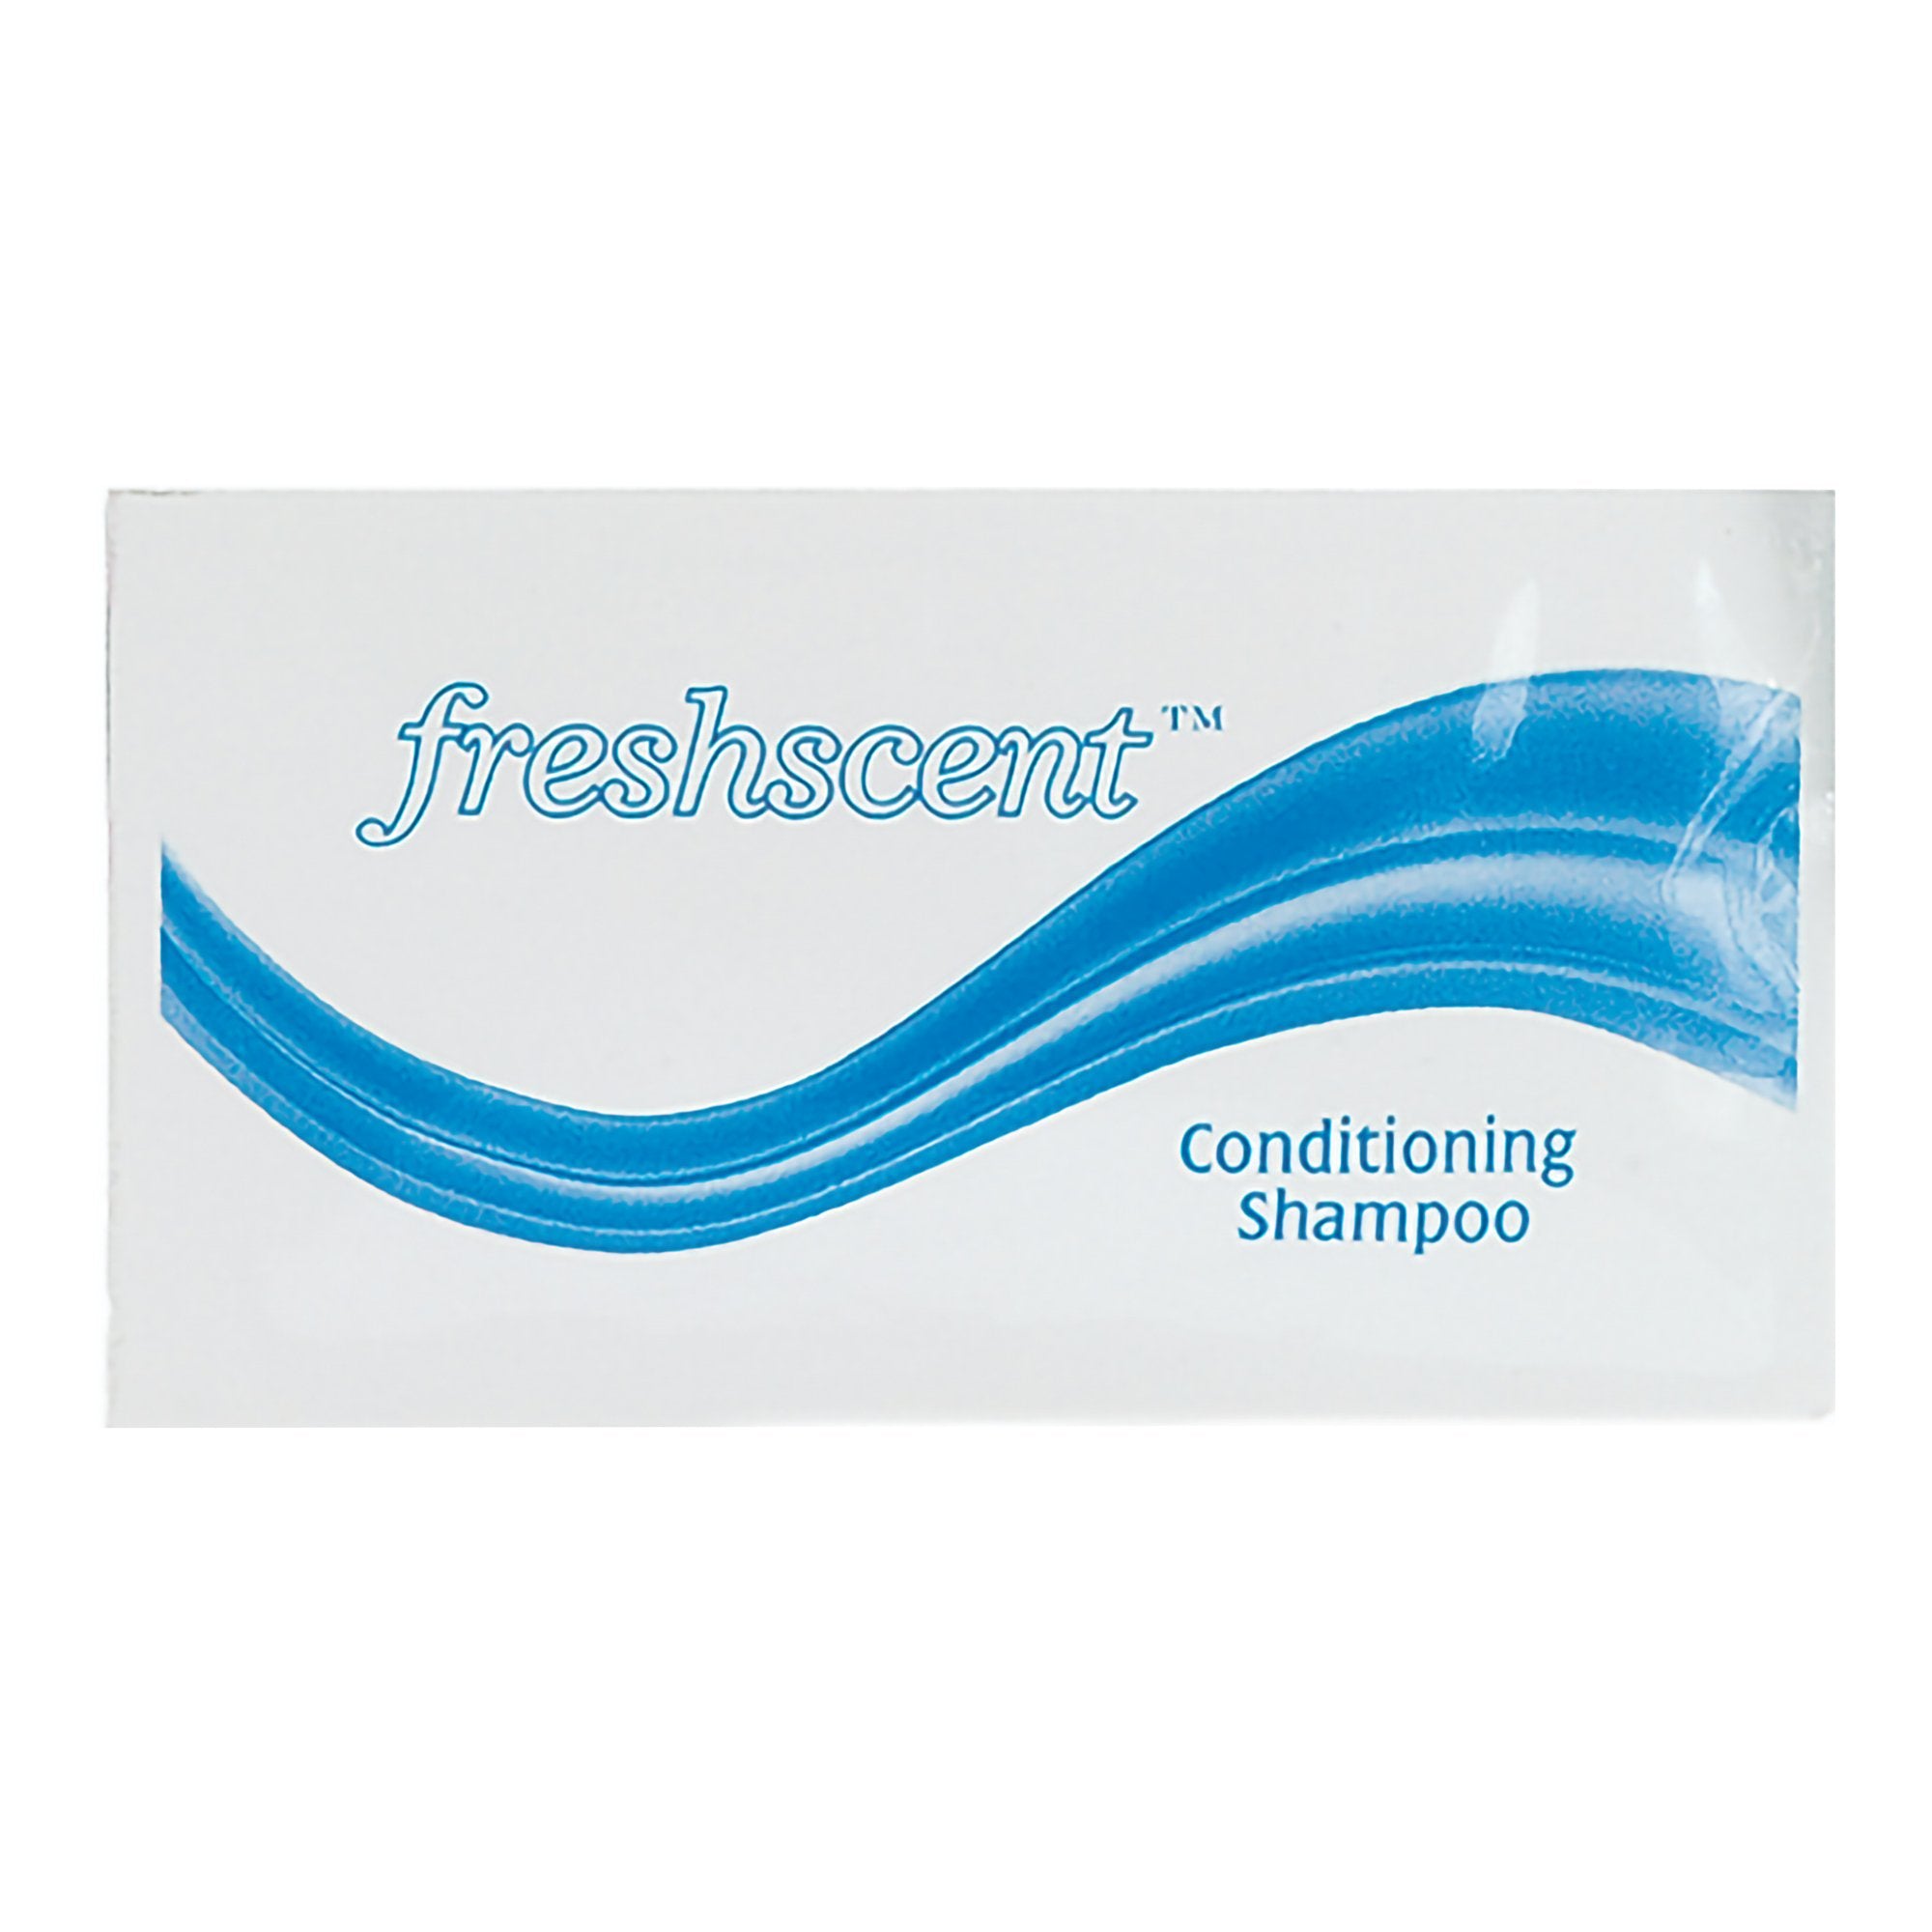 Shampoo and Conditioner Freshscent™ 0.34 oz. Individual Packet Scented